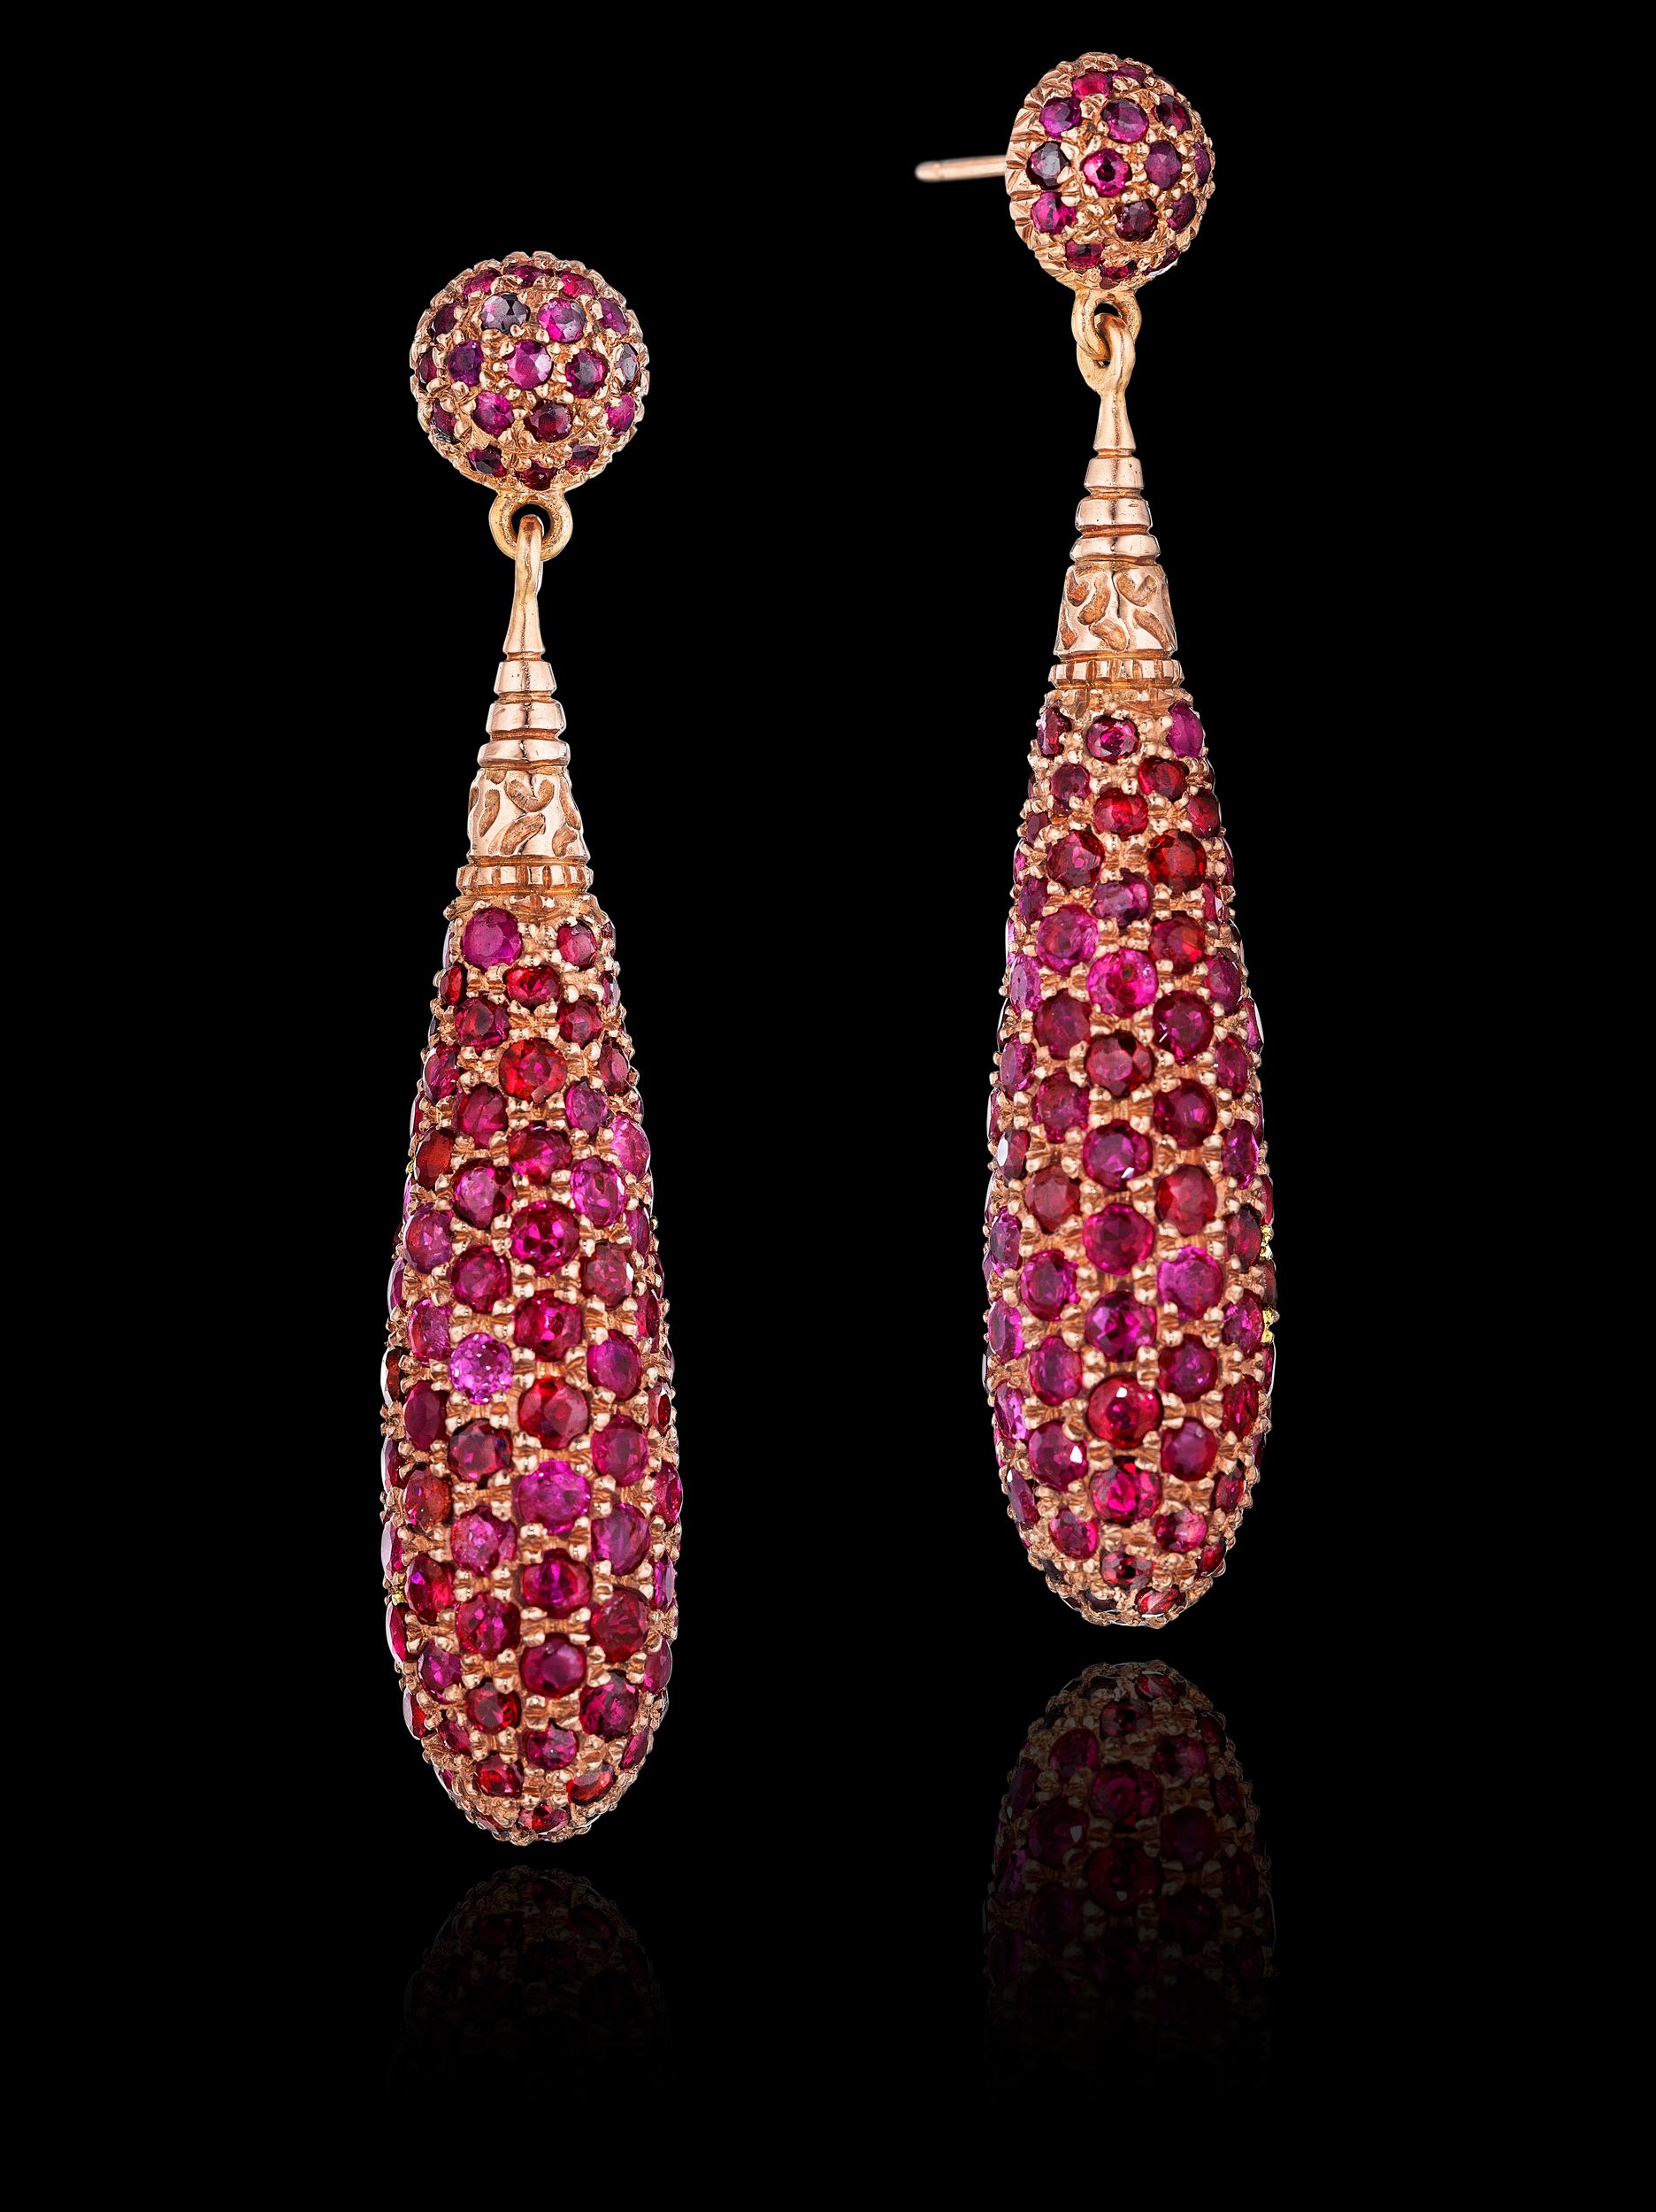 Limited Edition YOKI design, a pair of Ruby Drop pendant Earrings set in 18 Karat rose gold with a dazzling effect of pave set rubies in a three-dimensional elongated teardrop dangling from the ear.

Gemstones: Rubies

Piece Dimensions: 5.2cm face